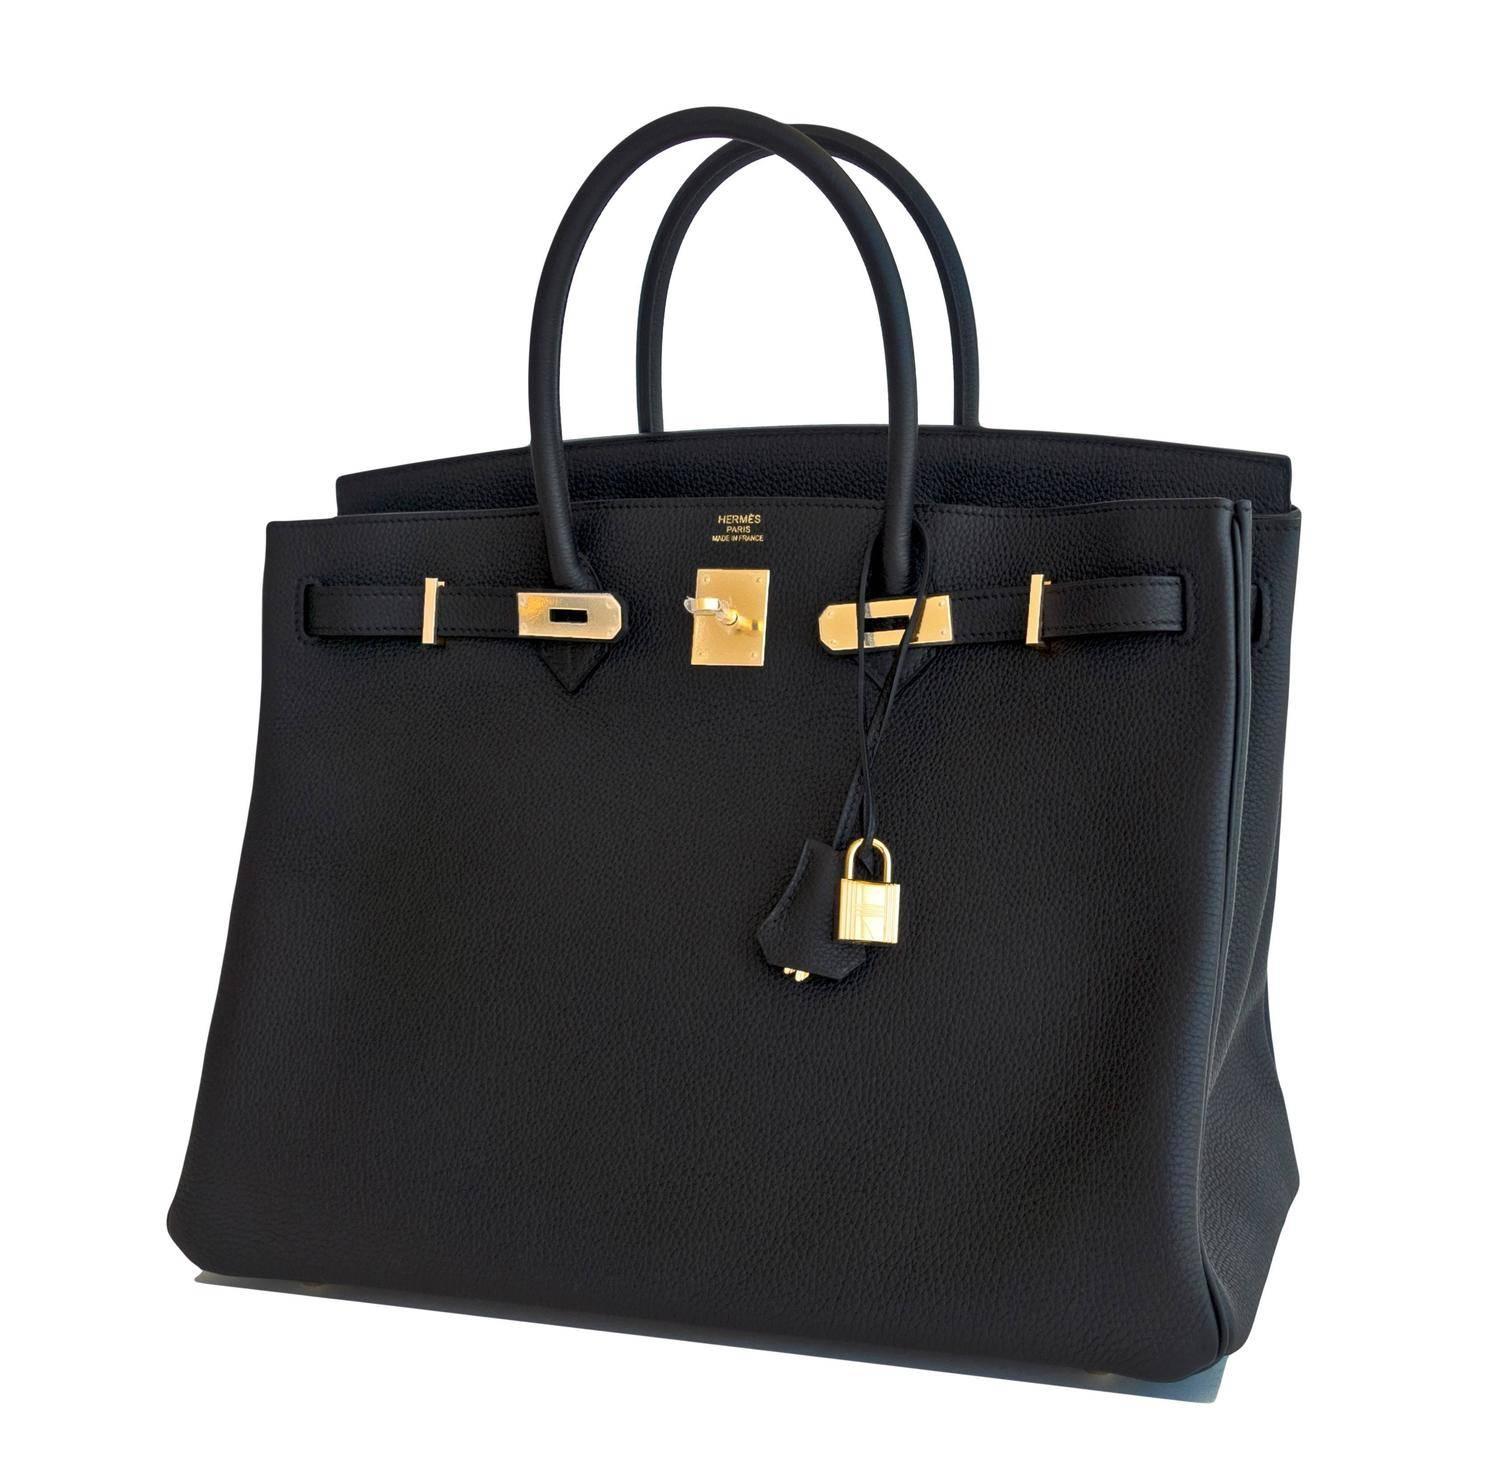 Hermes Black Togo 40cm Birkin Gold Hardware GHW Power Birkin D Stamp, 2019
Brand New in Box. Store fresh. Pristine Condition (with plastic on hardware). 
Just purchased from Hermes store; bags bears new 2019 interior D stamp.
Perfect gift! Comes